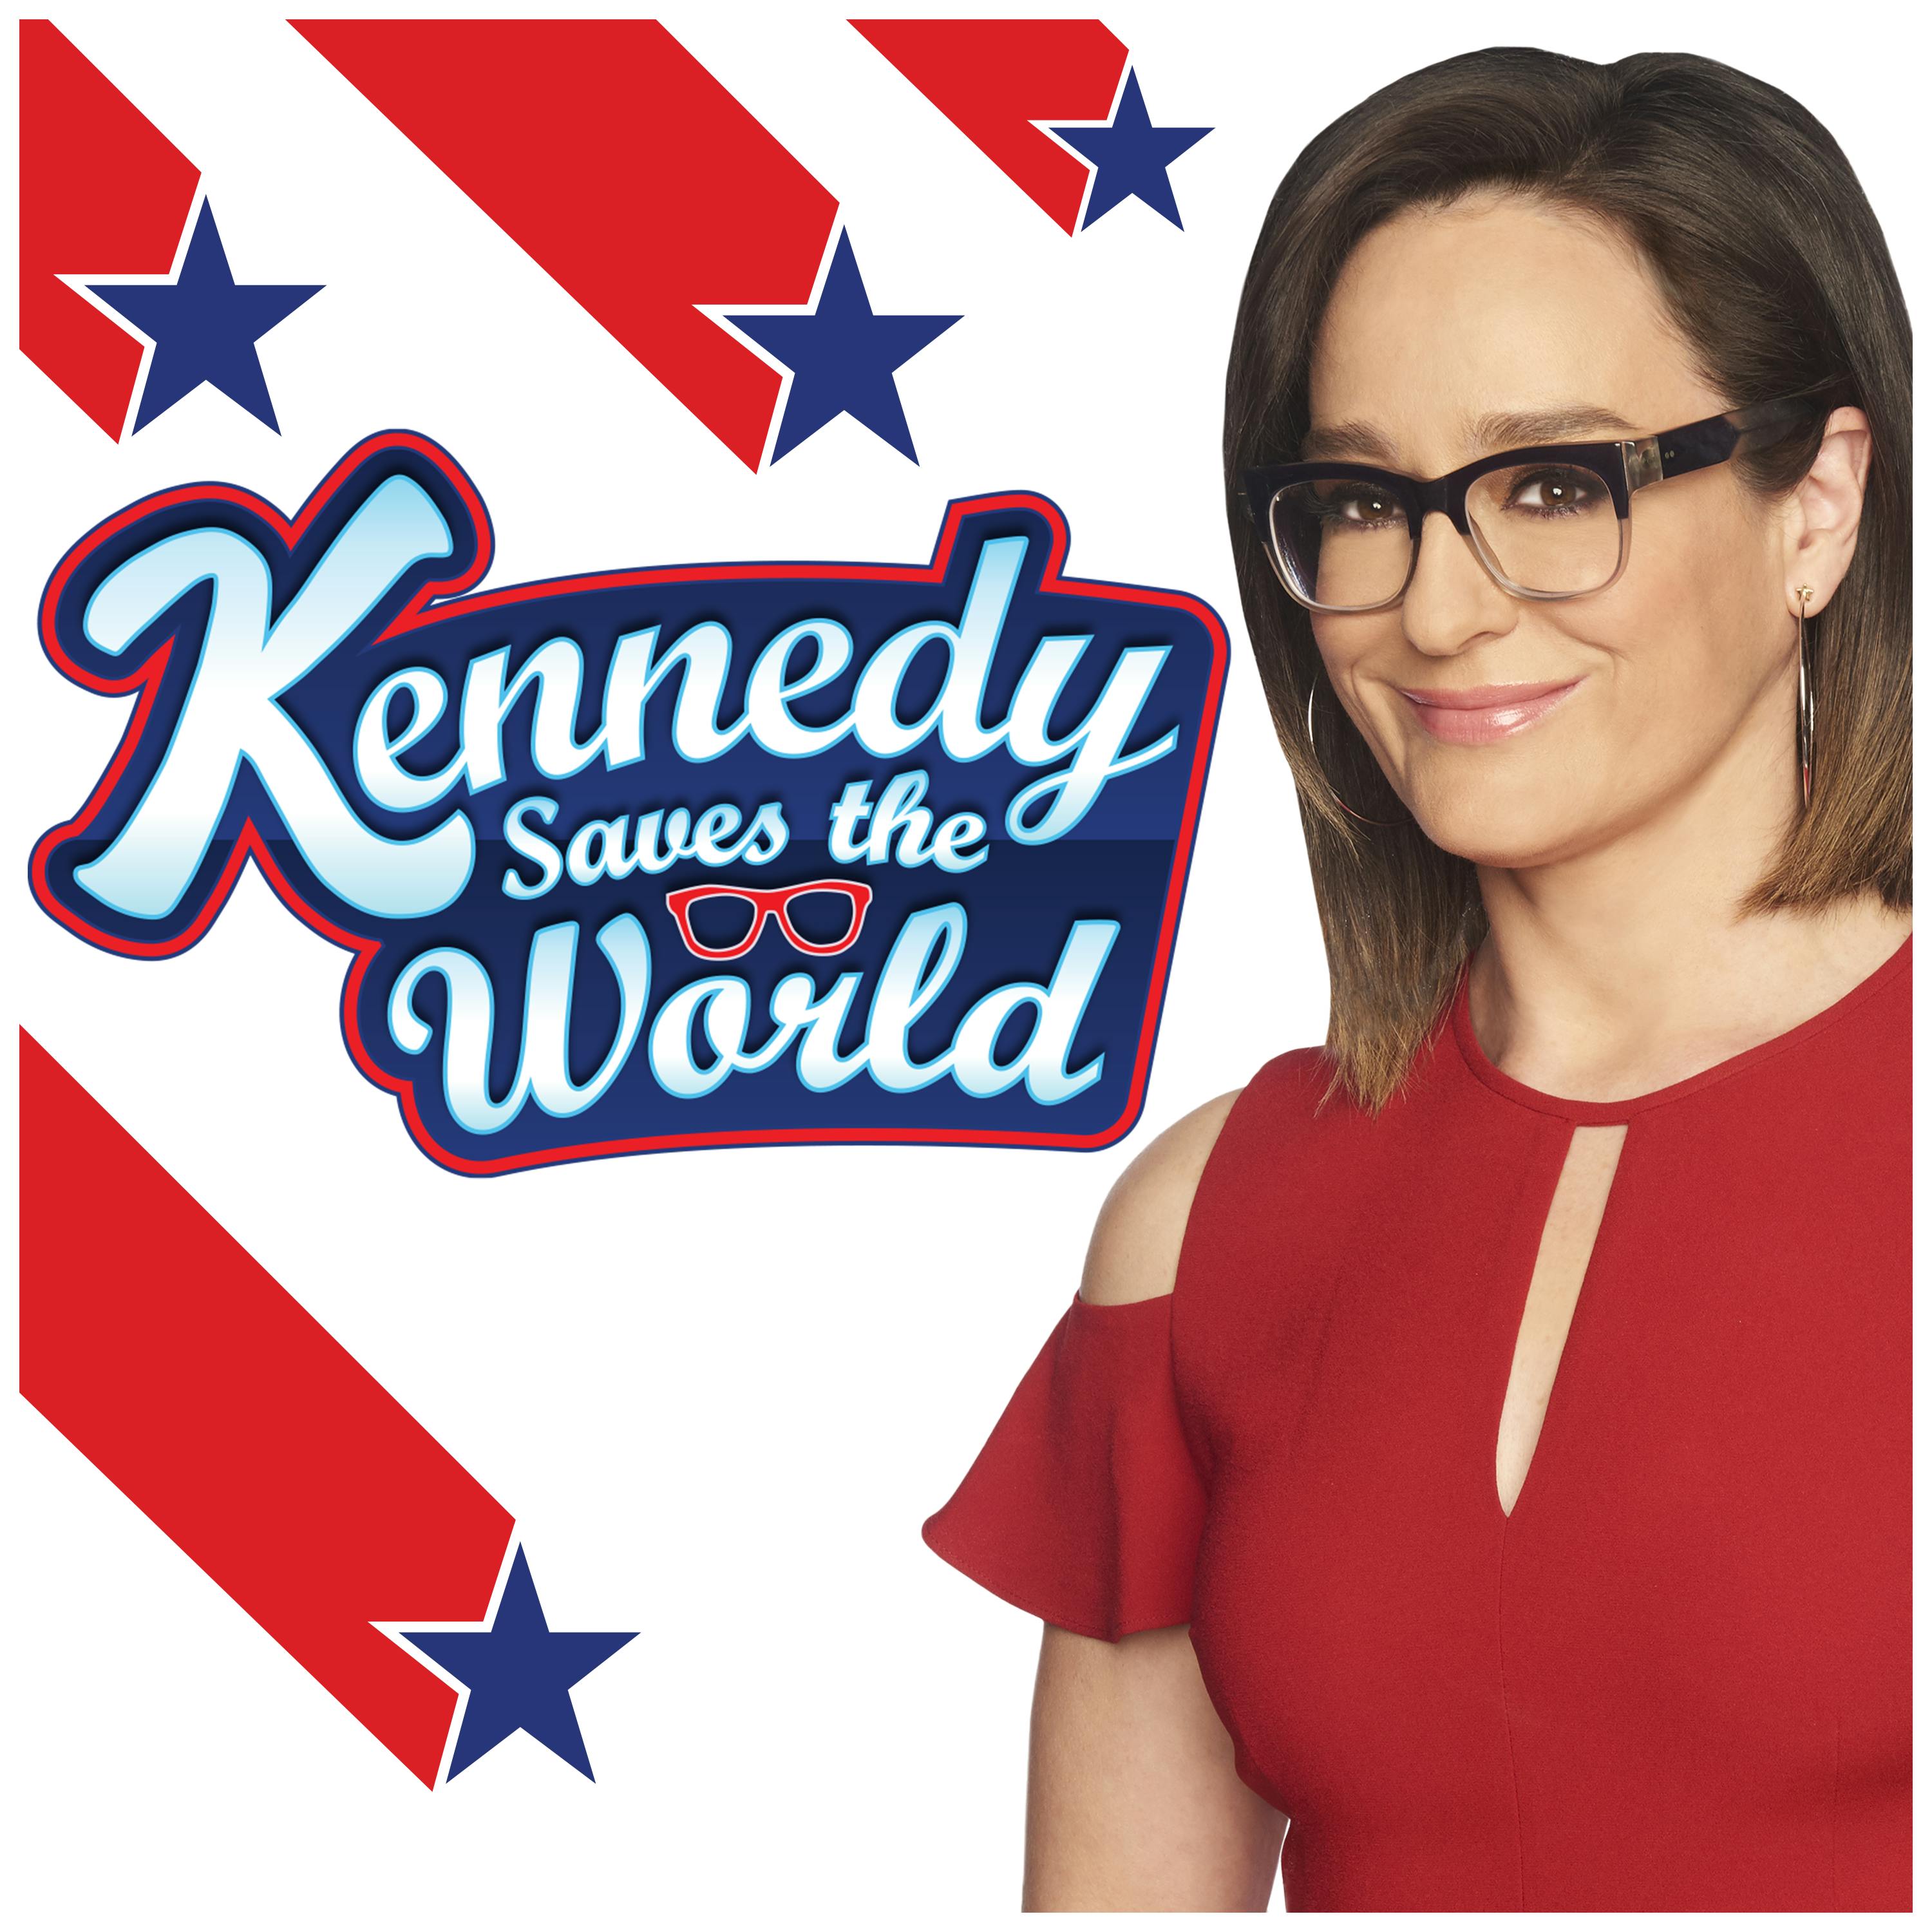 Kennedy Saves the World